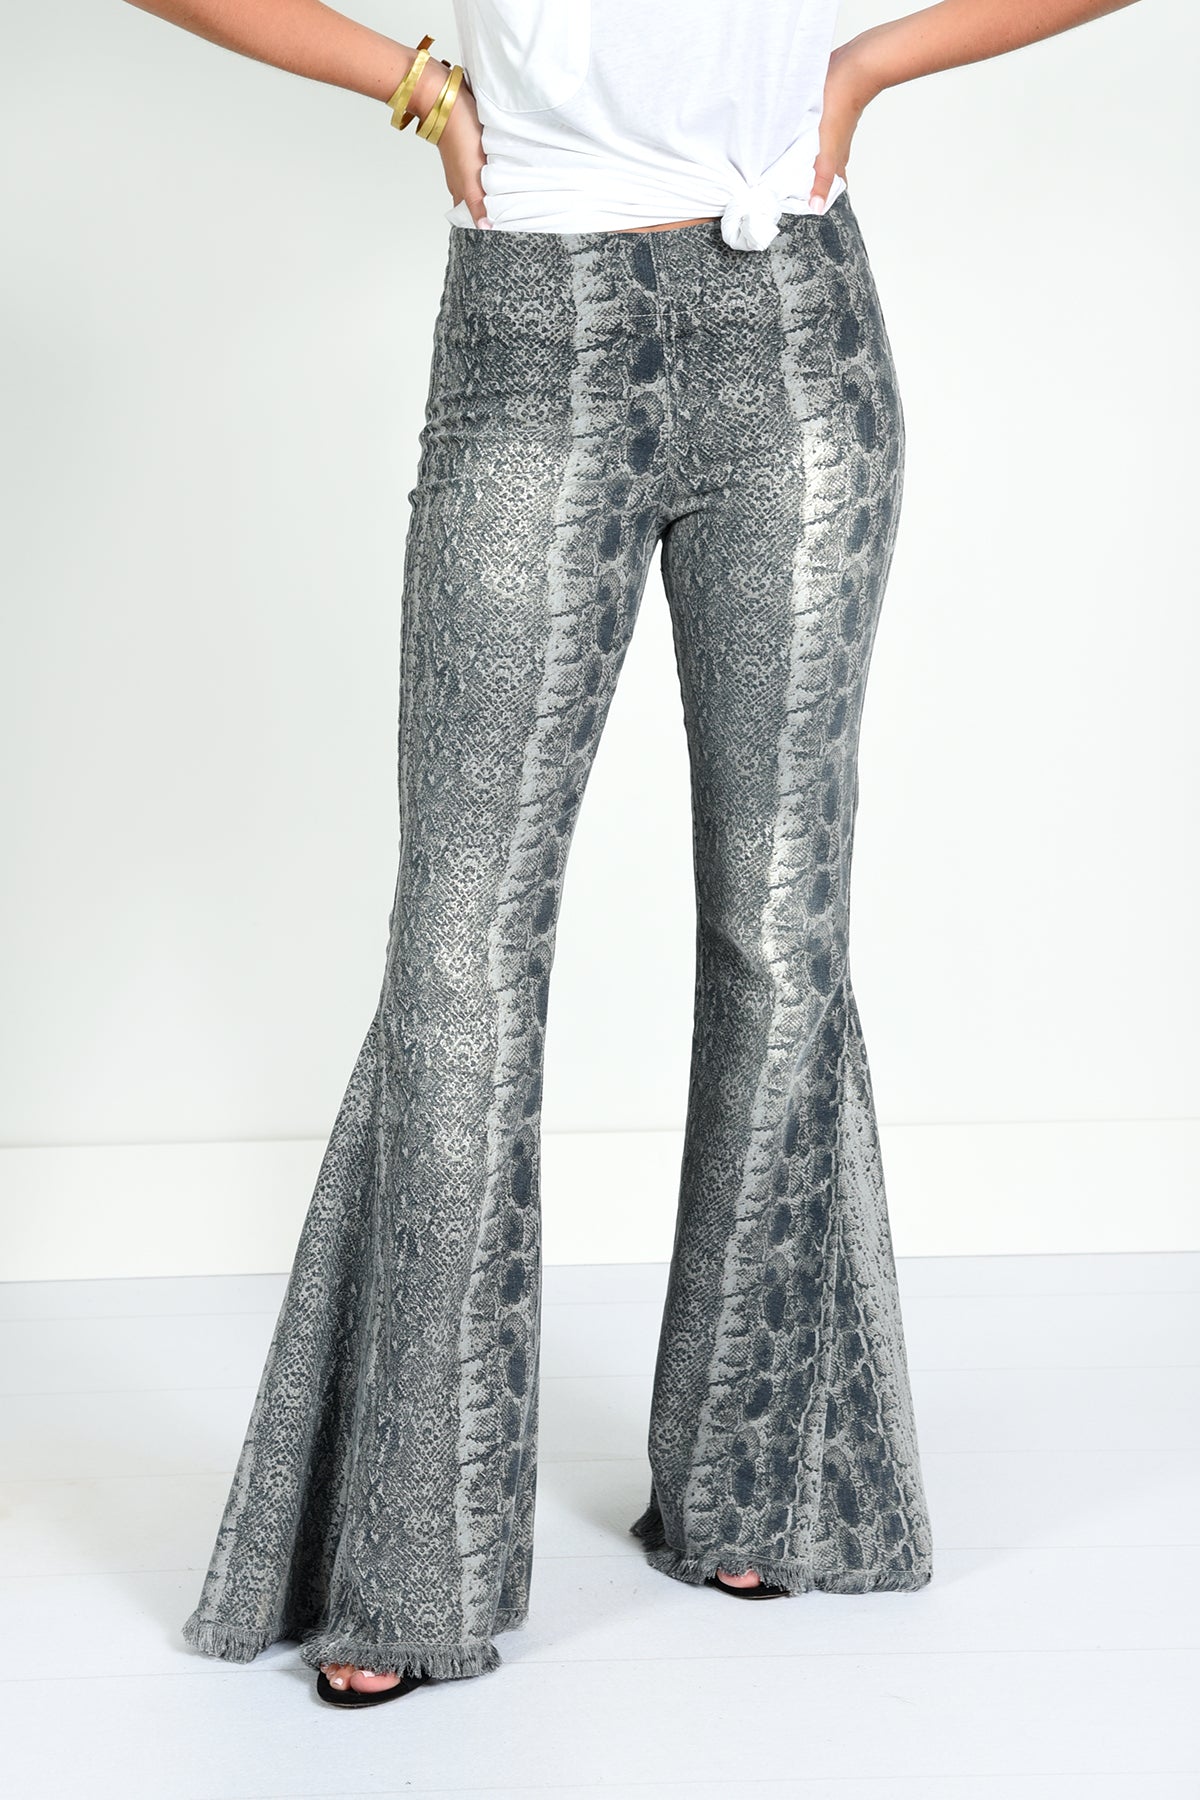 JUDITH MARCH PYTHON FLARE PANTS